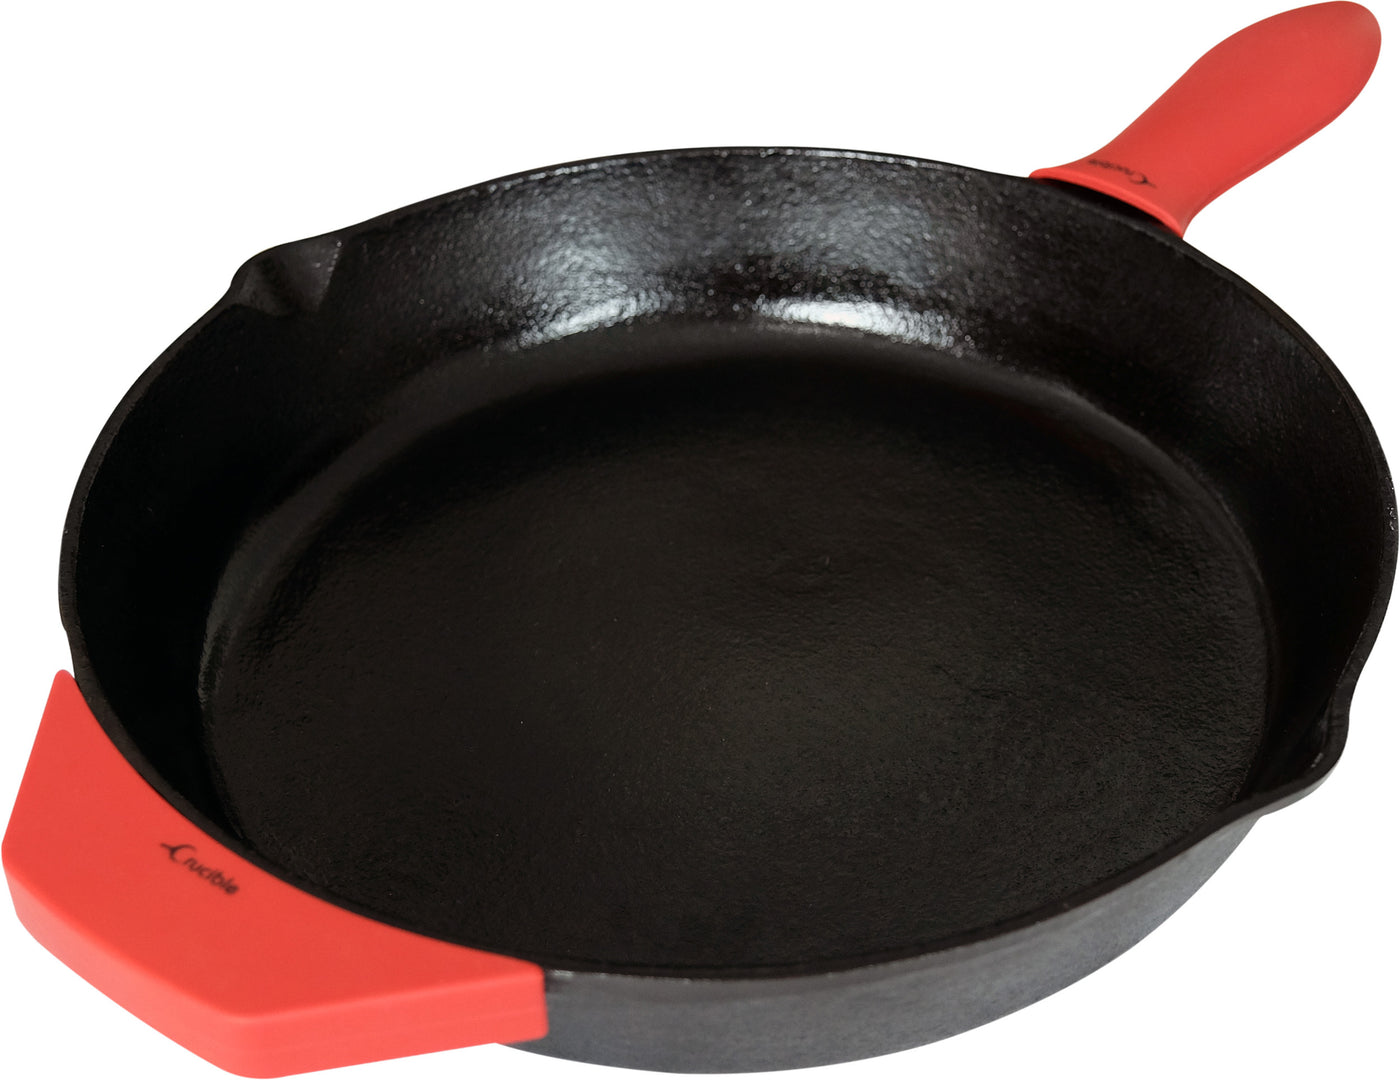 12-Inch/30,5 cm Cast Iron Skillet Set, Frying Pan, Silicone Handle Holders